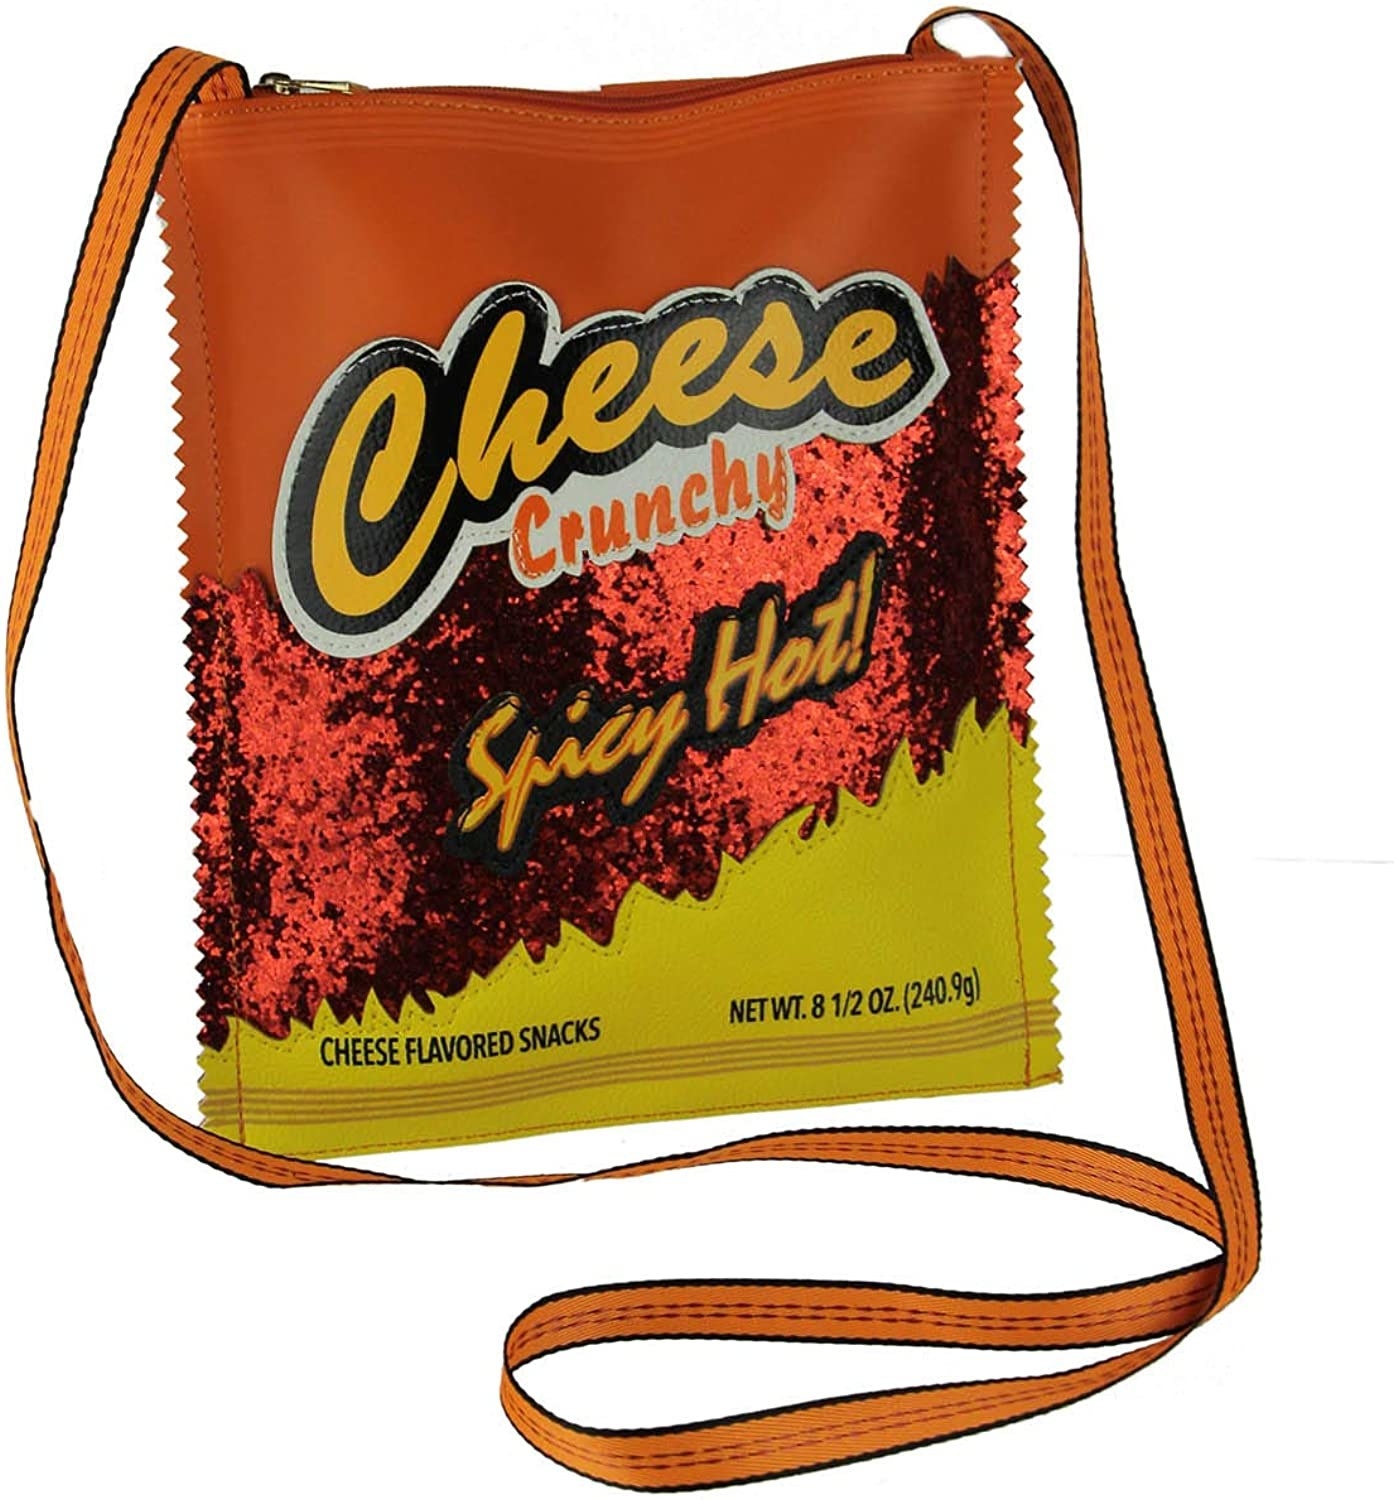 orange, red, and yellow crossbody bag shaped like a chip bag with the text &quot;cheese crunchy spicy hot!&quot;